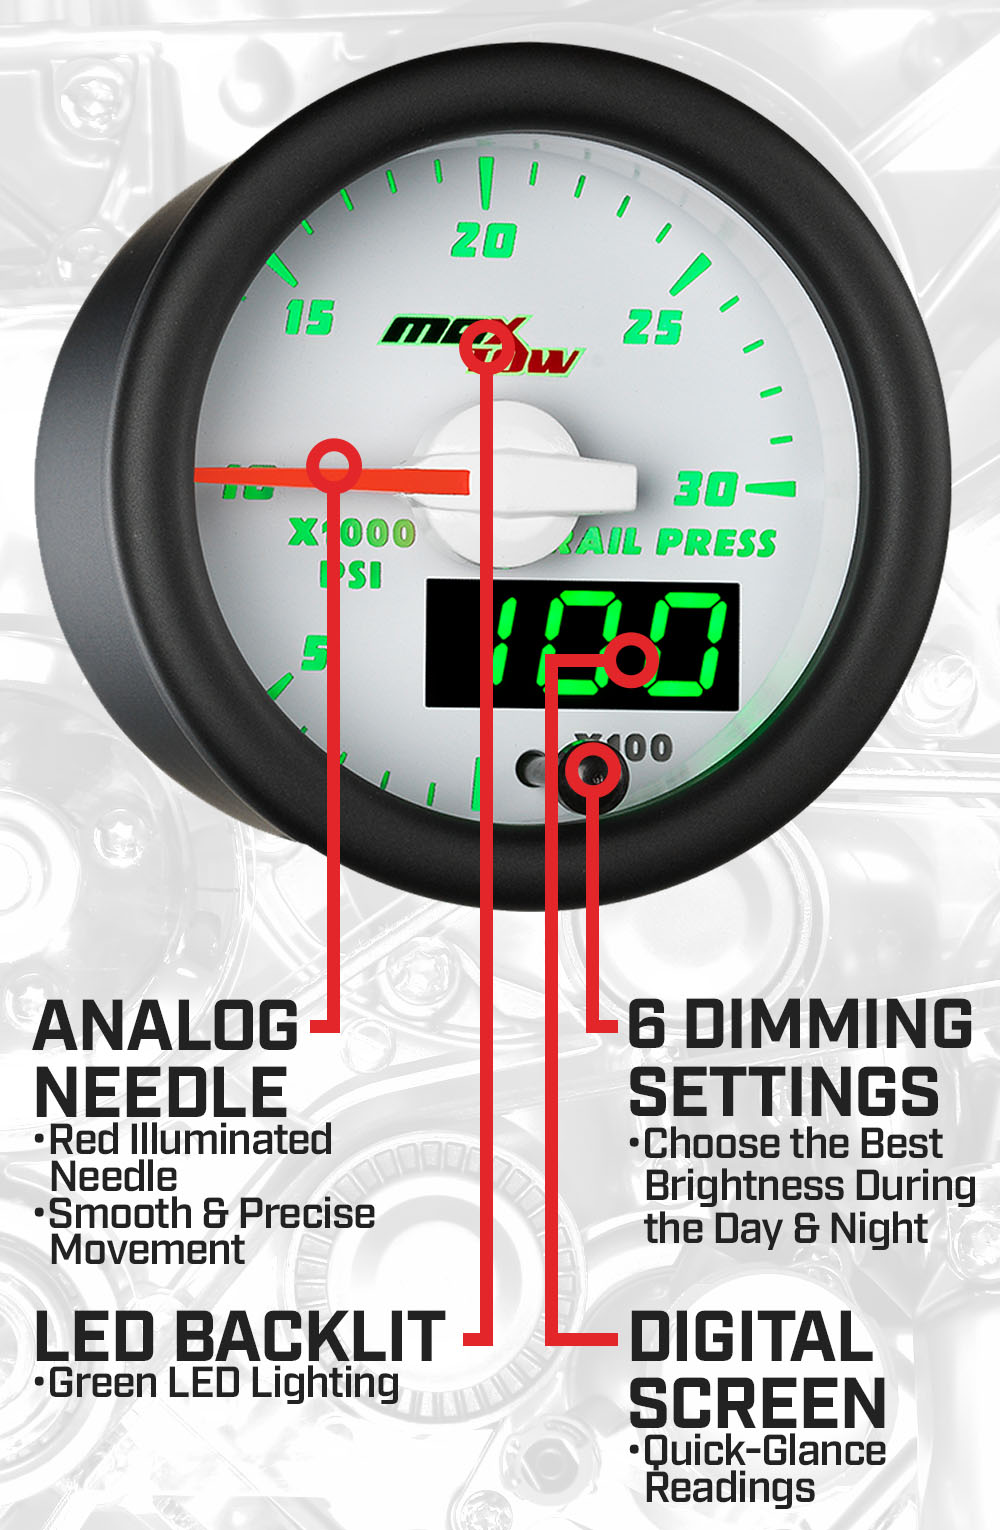 White & Green Double Vision Fuel Rail Pressure Gauge Features